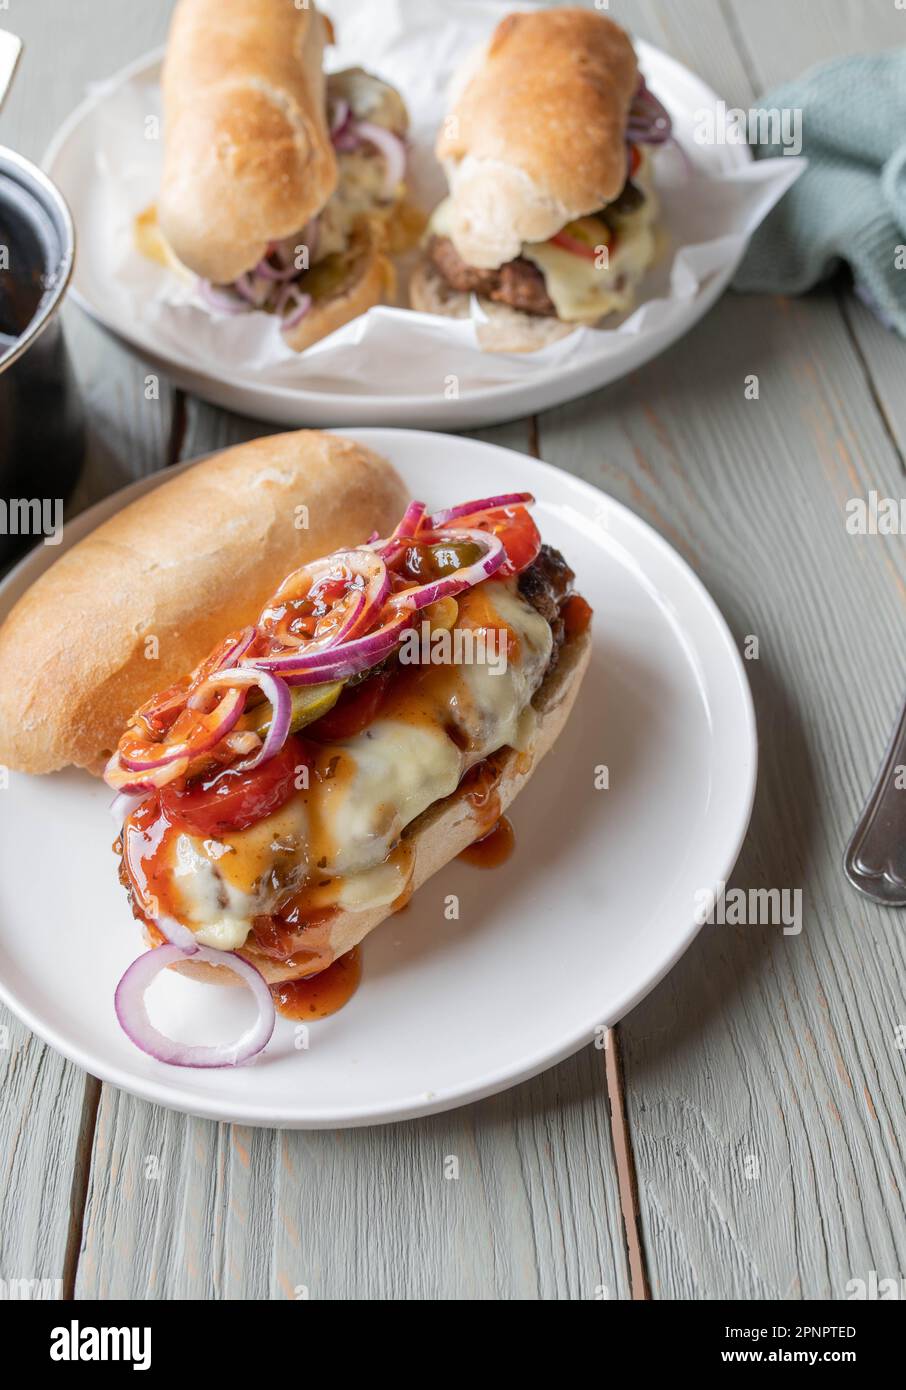 Burger sandwich with cheese, onions, tomatoes, pickles and homemade barbecue sauce Stock Photo